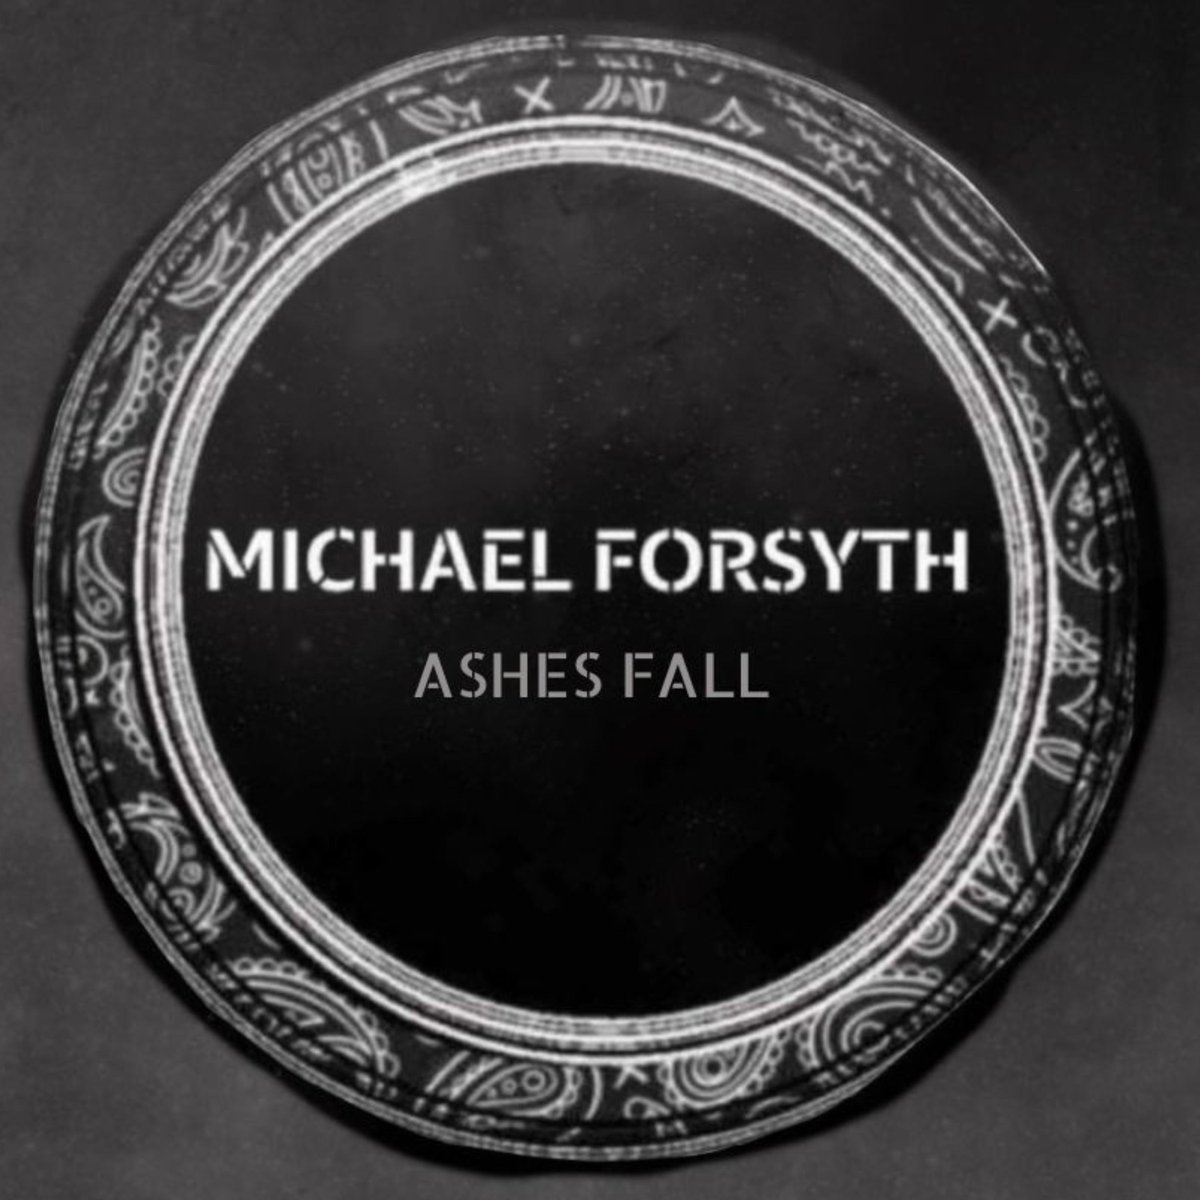 I’ve got new music dropping soon (powered by @dittomusic) dittomusic.com Friday 29th March ... Ashes falls